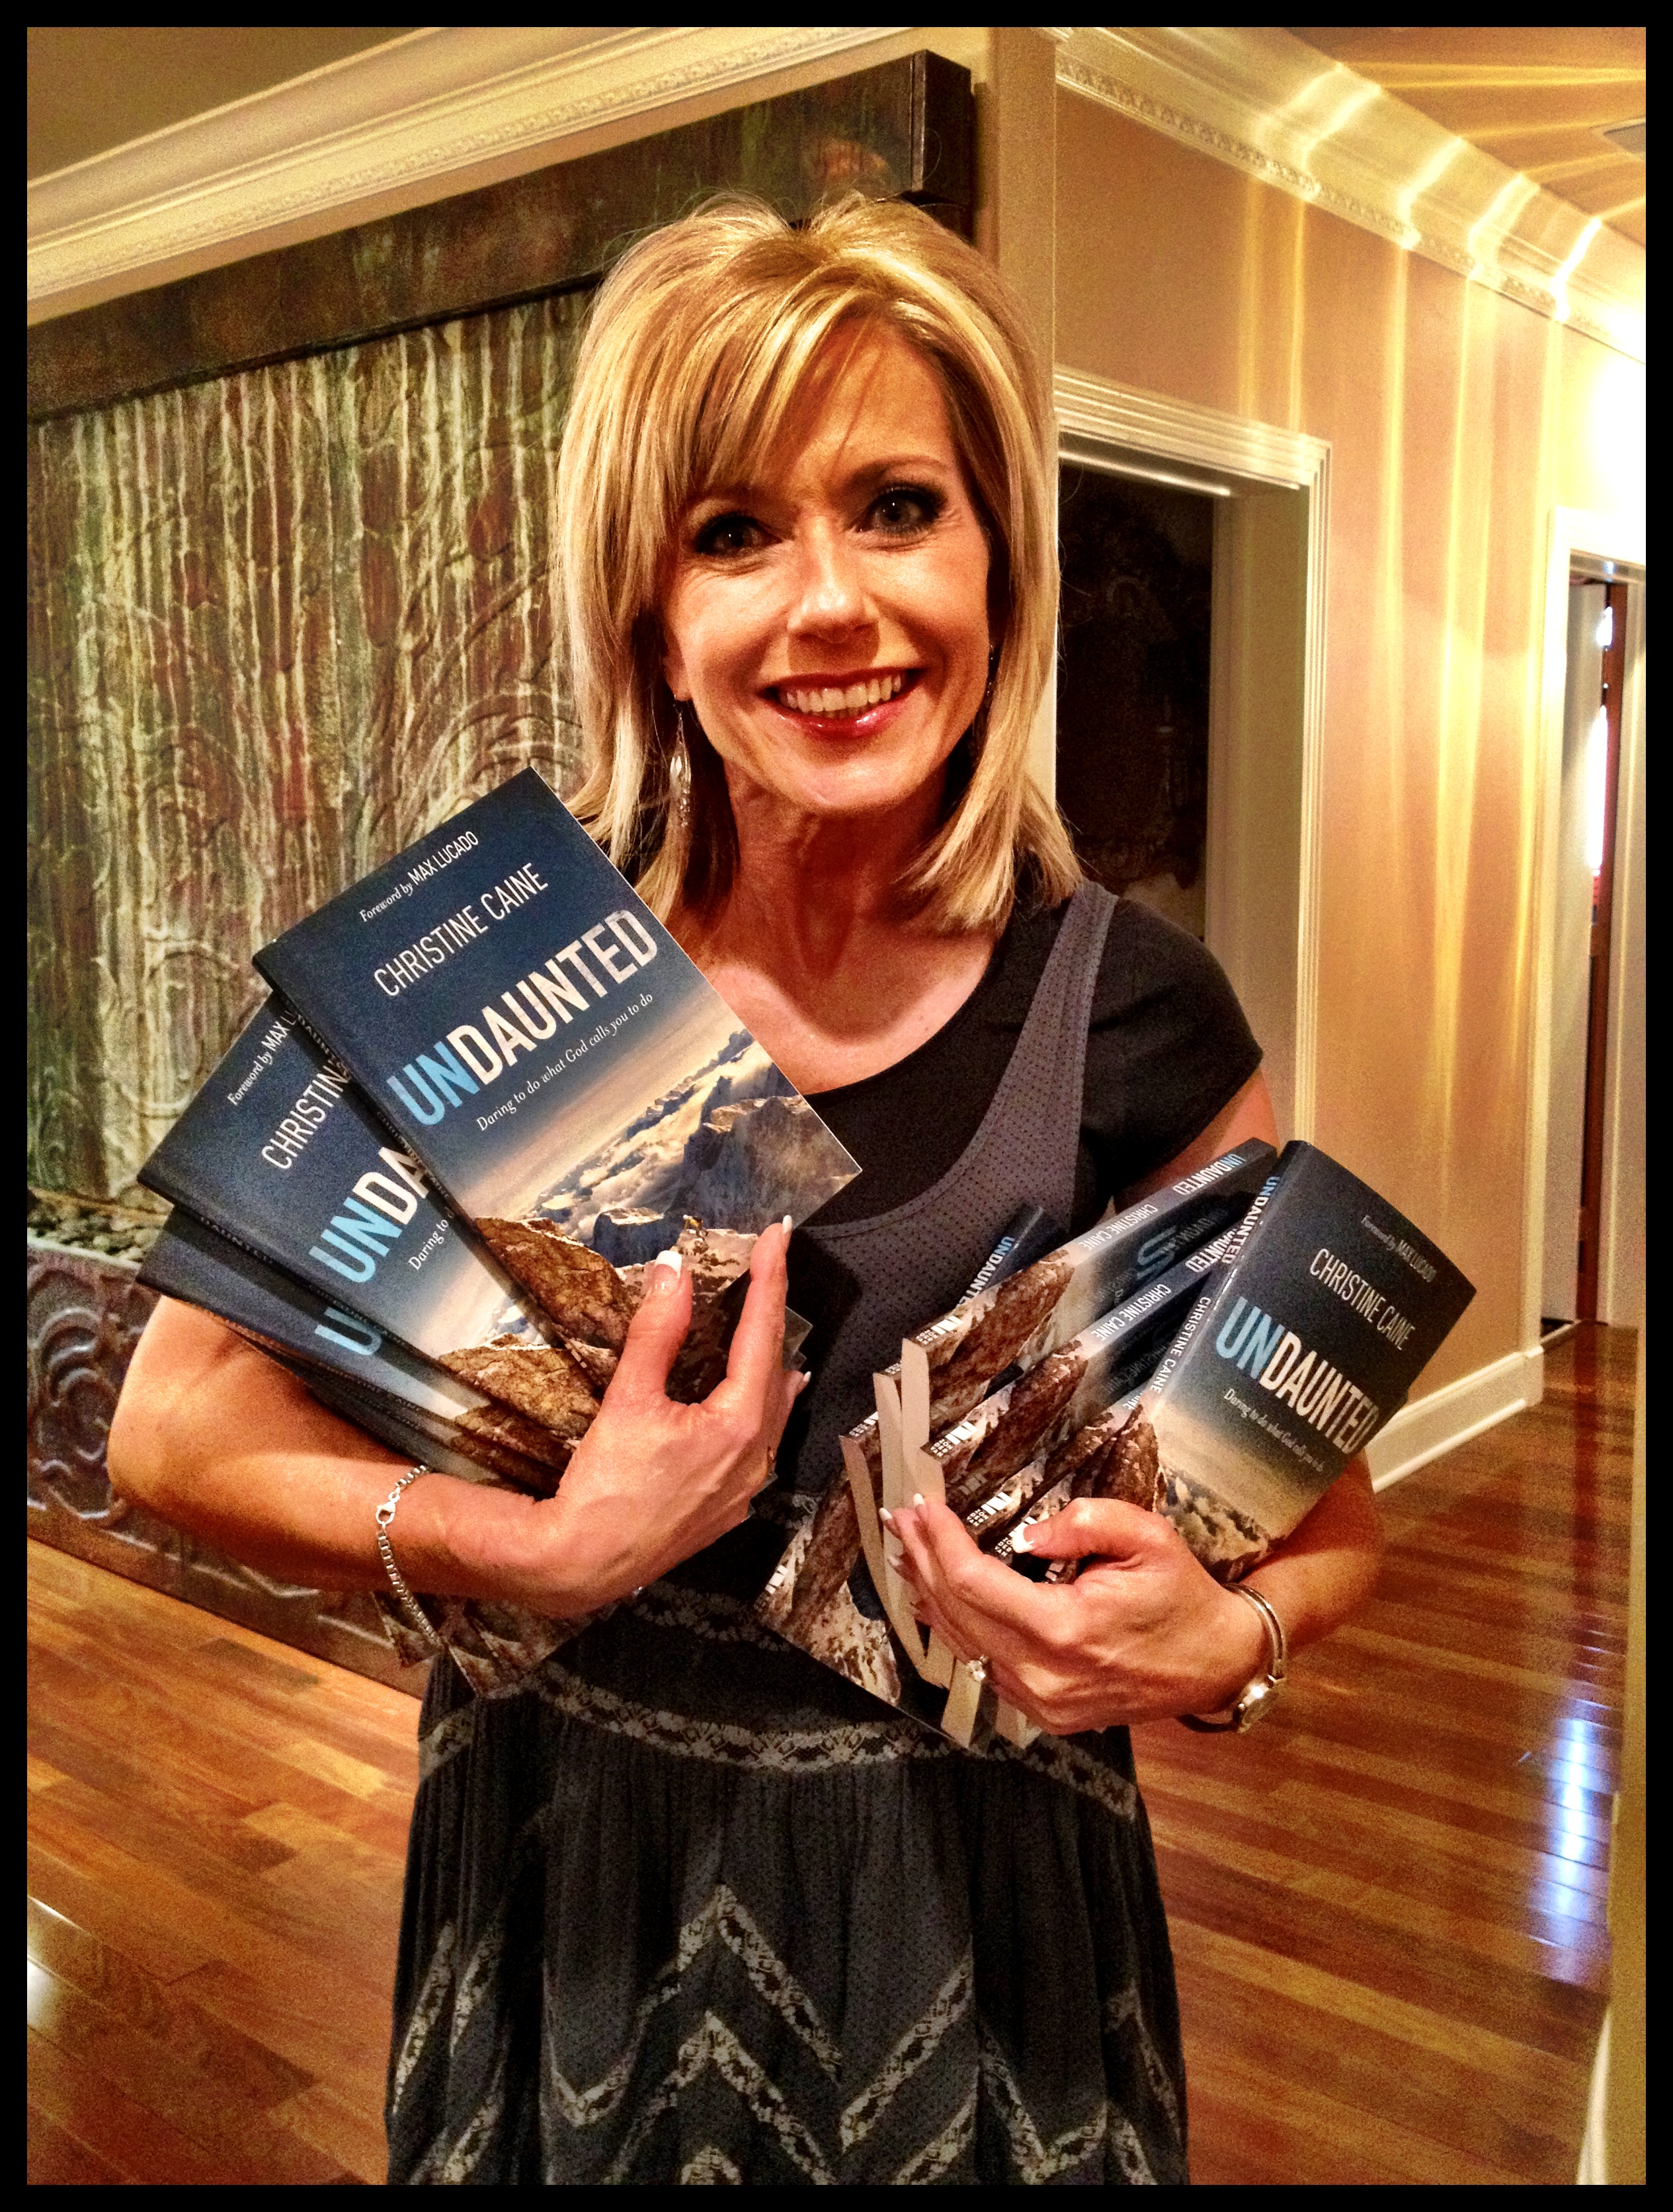 Undaunted By Christine Caine Autographed Books To Give Away